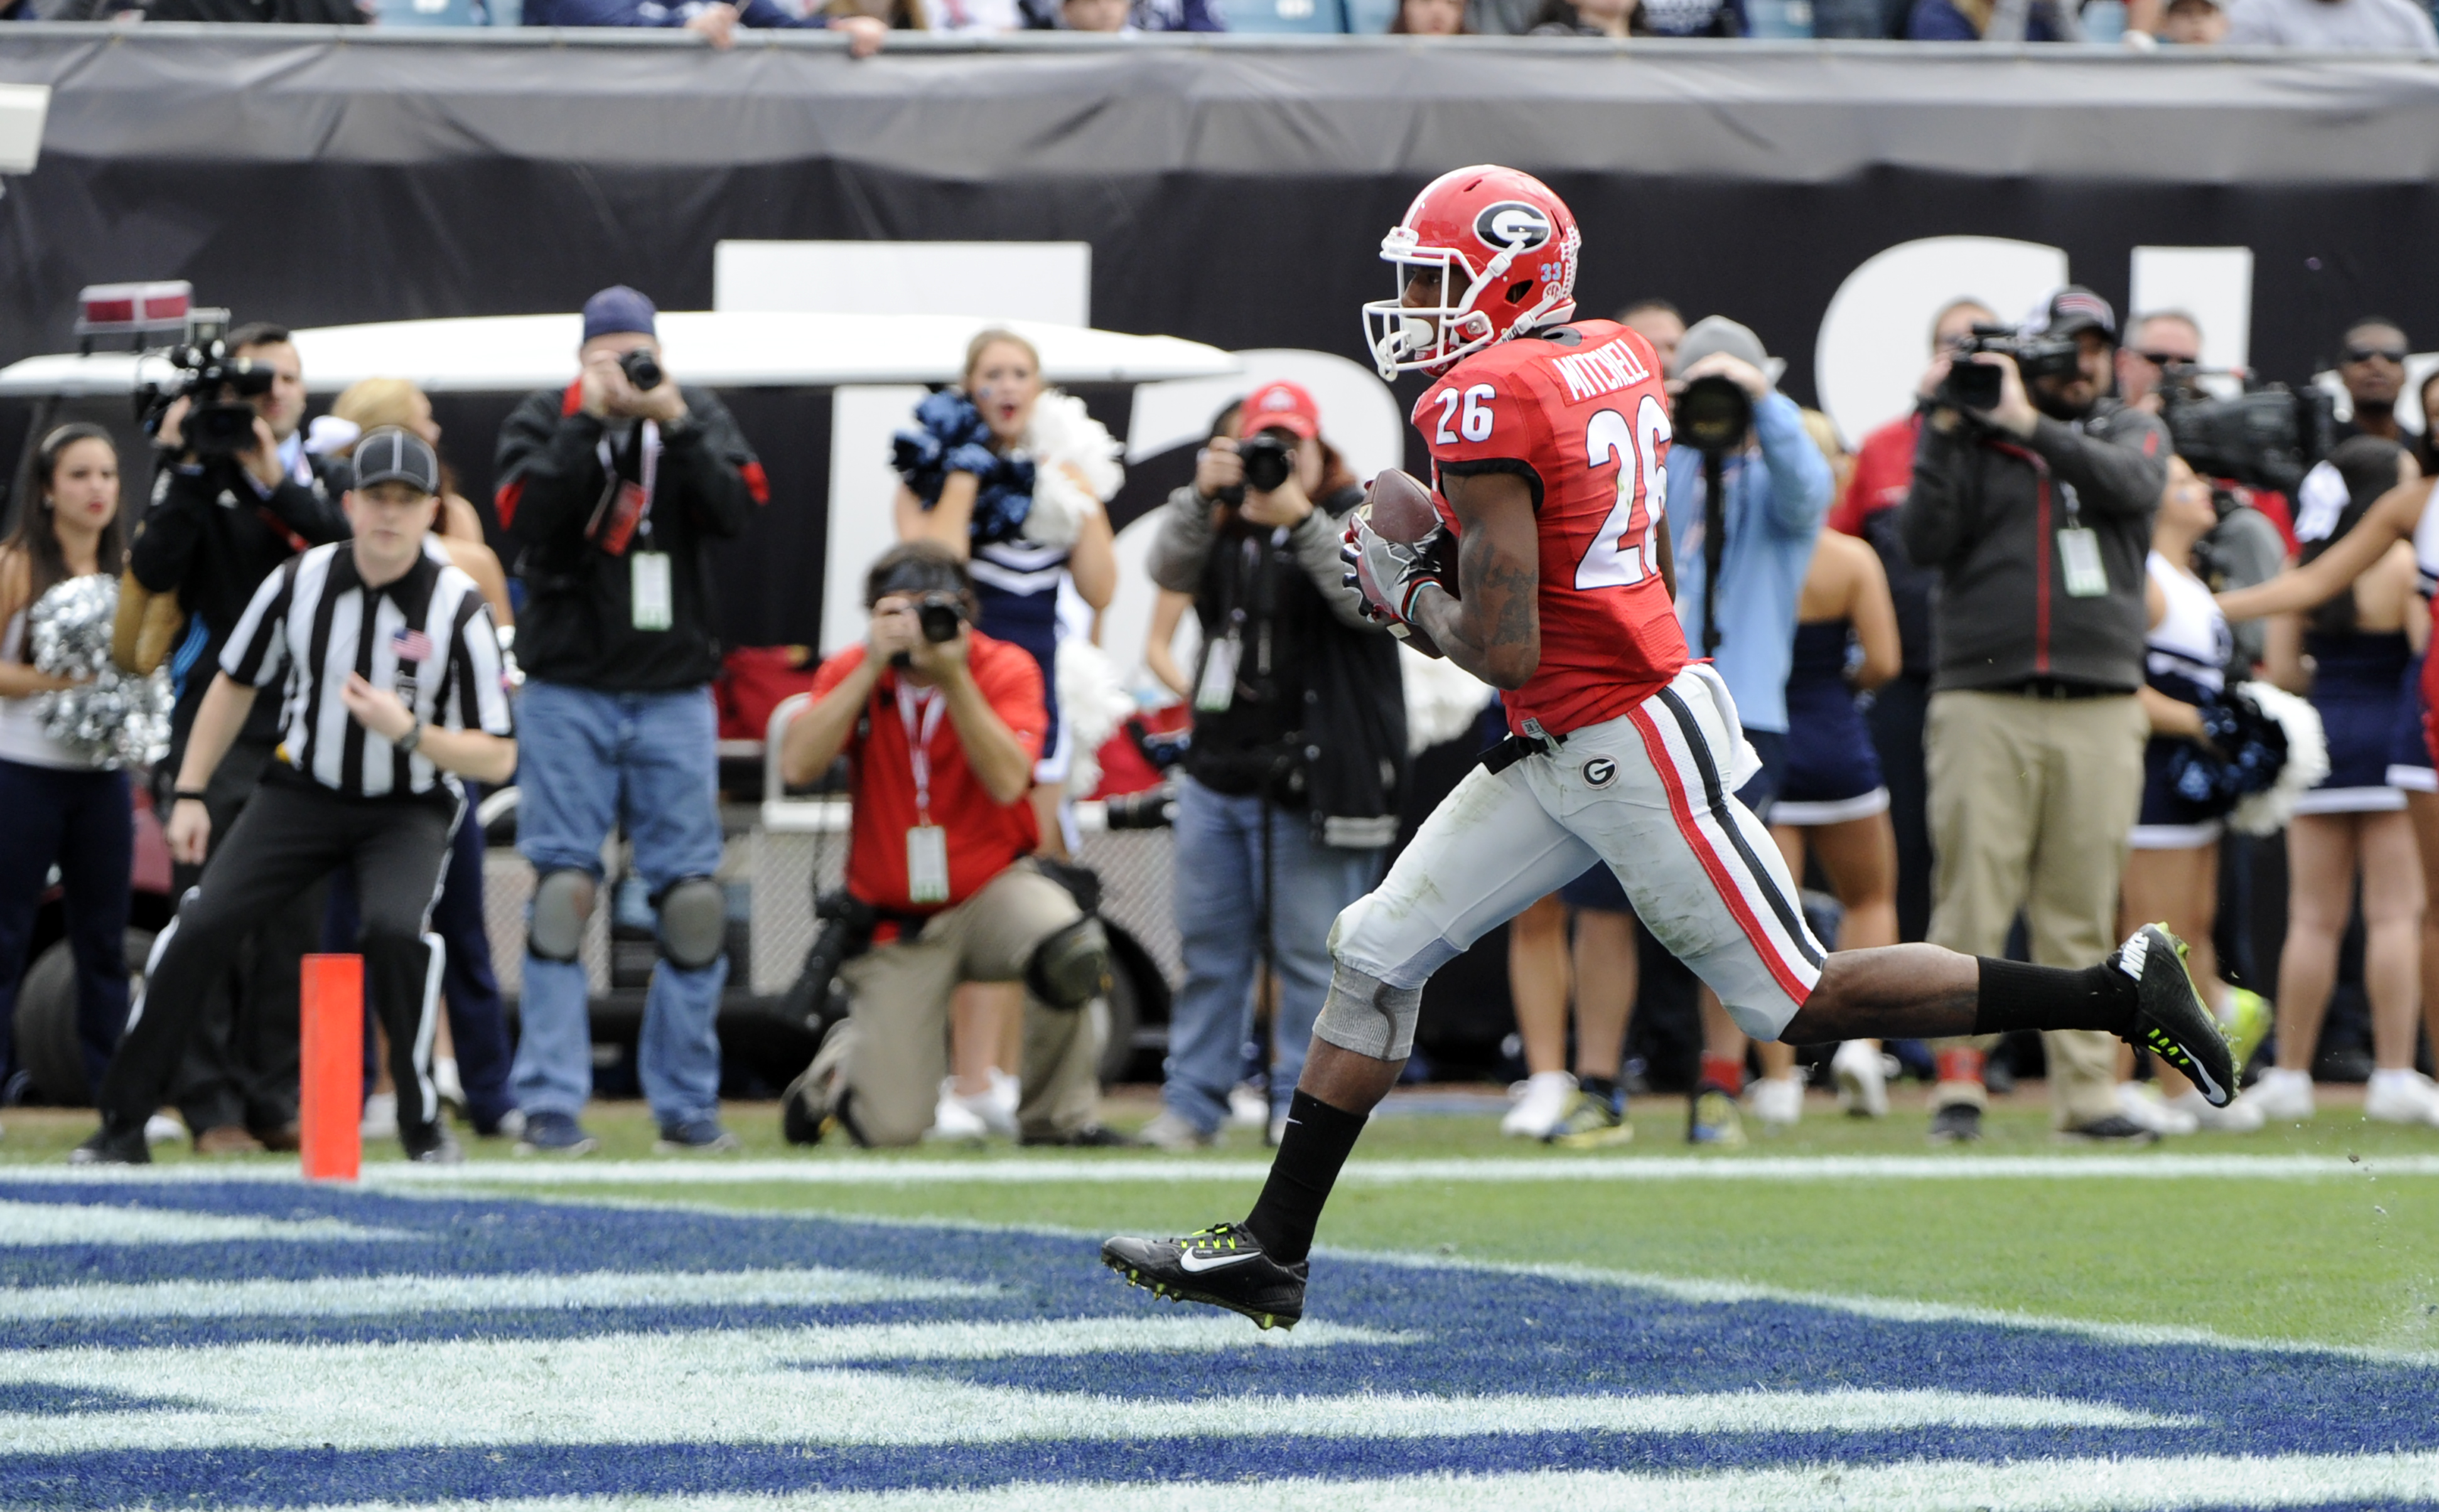 Georgia receiver Malcolm Mitchell (26) scores a touchdown during the Bulldogs' game against the Penn State Nittany Lions in the TaxSlayer Bowl on Saturday, Jan. 2, 2016 at EverBank Field in Jacksonville, Florida (Photo by John Kelley)